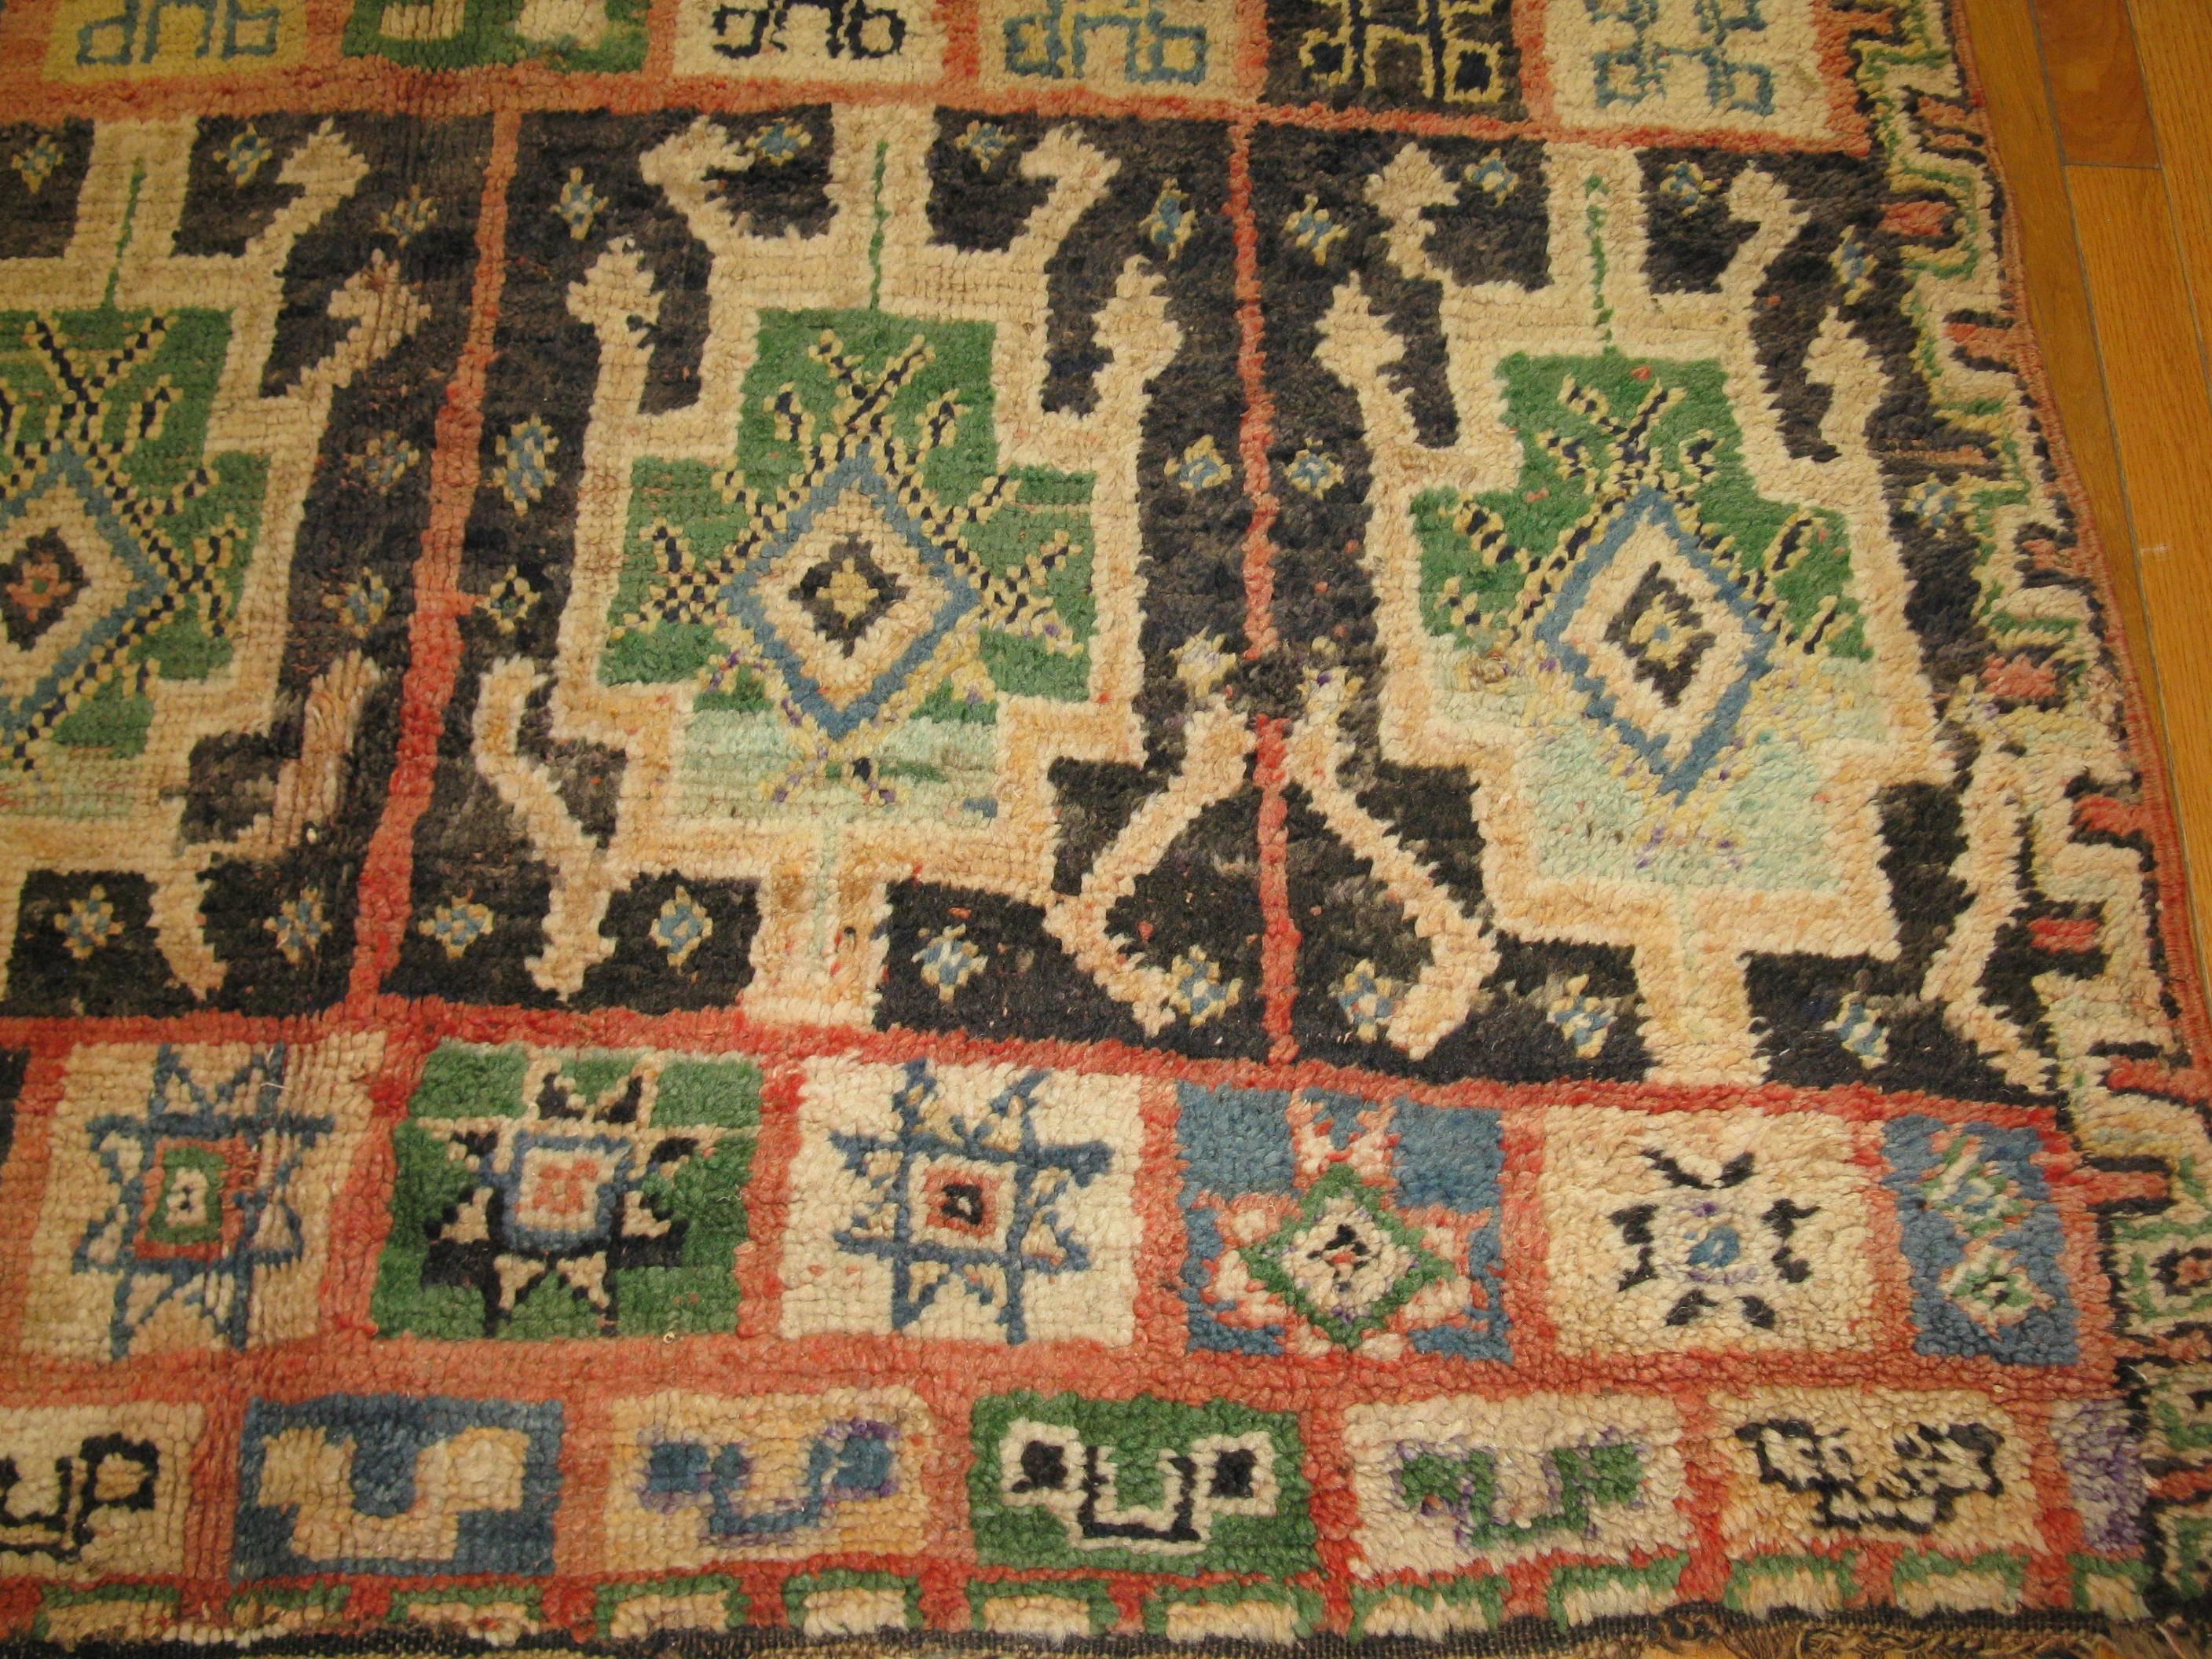 Vintage Hand-Knotted Beni Ourain Moroccan Rug In Excellent Condition For Sale In Atlanta, GA